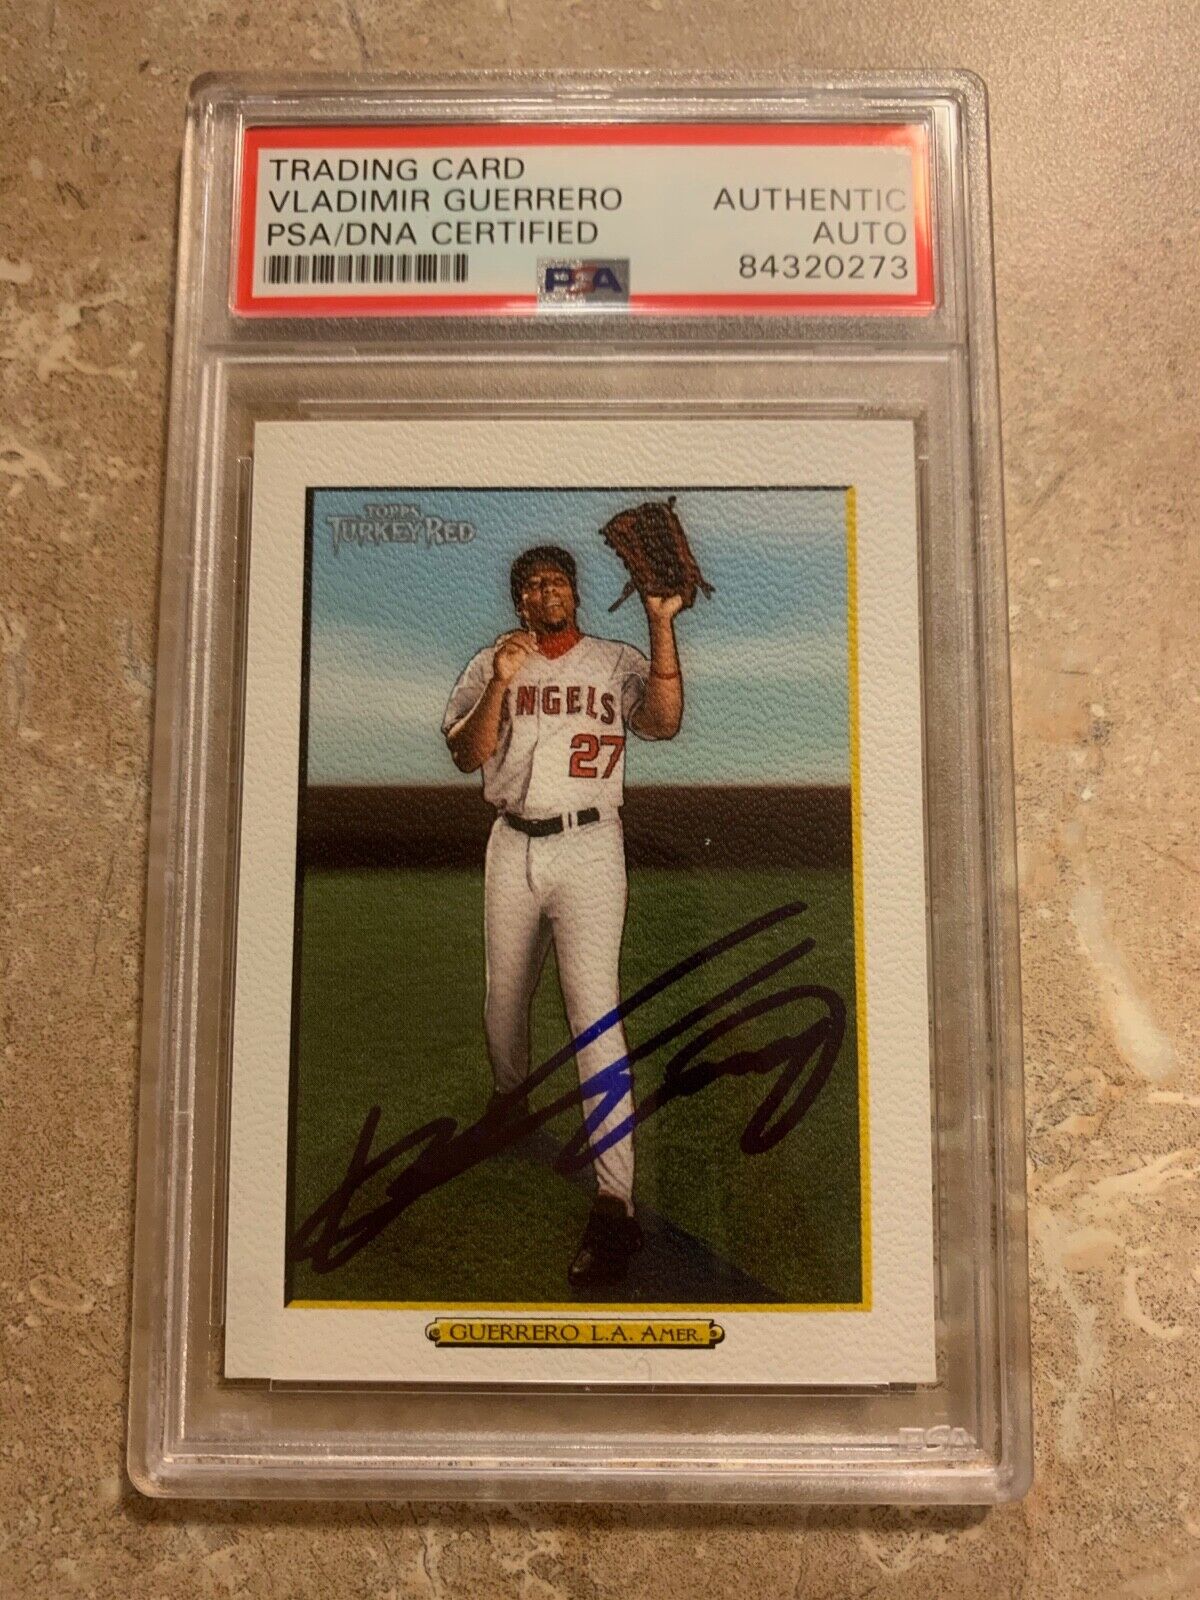 Vladimir Guerrero Autographed 2006 Topps Turkey Red Card PSA Slabbed  Angels